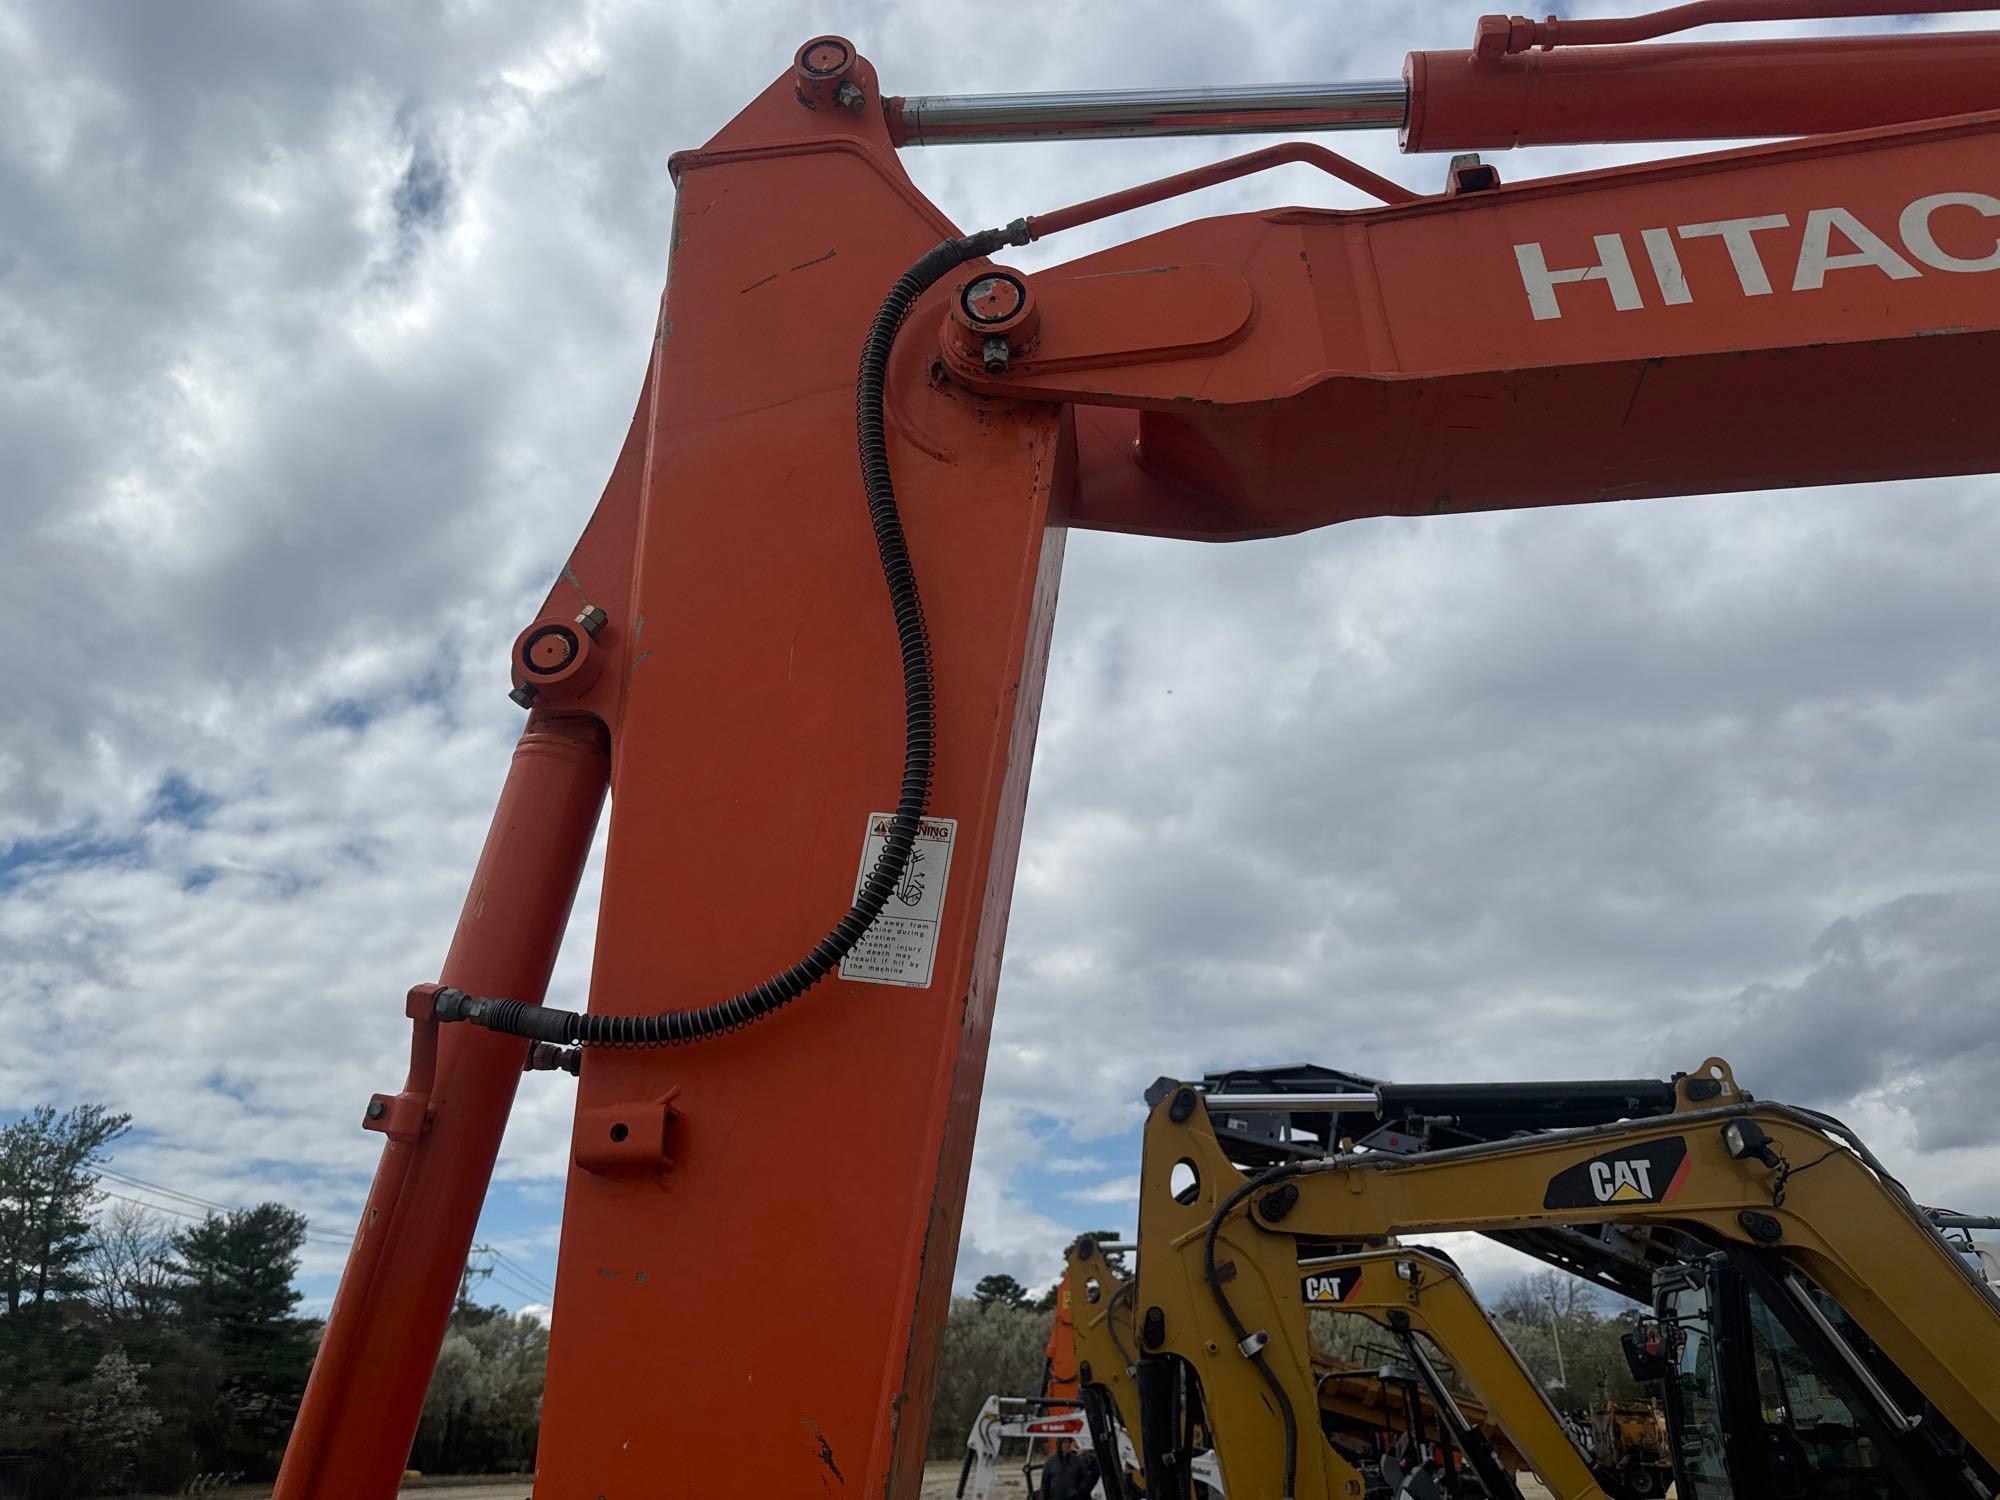 2014 HITACHI ZX85USB-5 HYDRAULIC EXCAVATOR SN; 017465 powered by diesel engine, equipped with Cab,